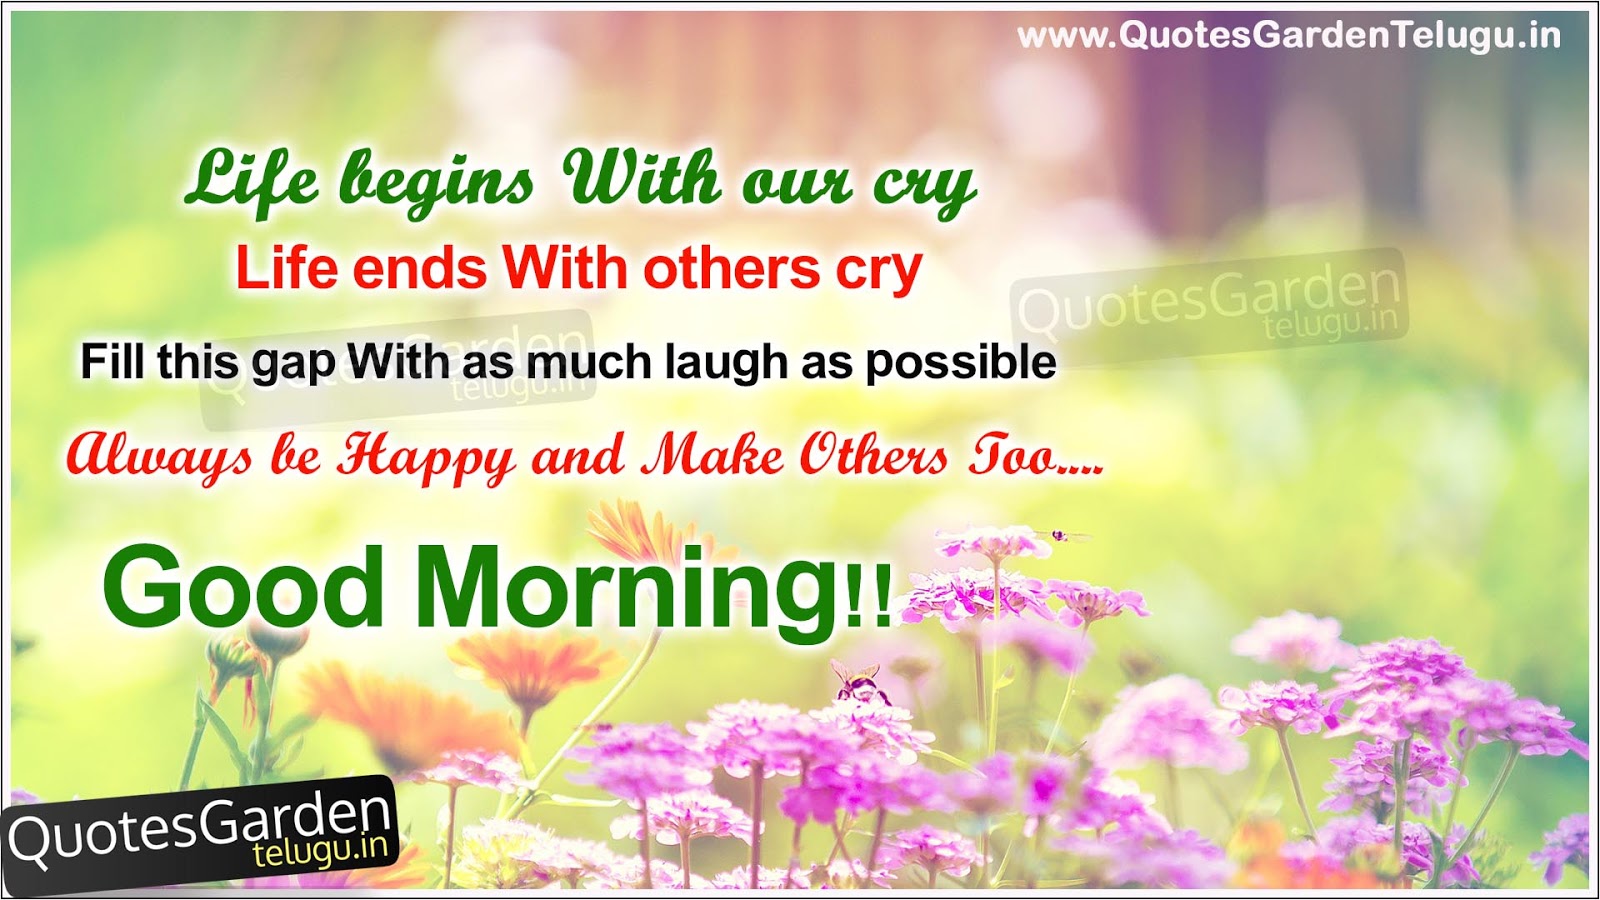 good morning messages with nice HD wallpapers | QUOTES GARDEN TELUGU |  Telugu Quotes | English Quotes | Hindi Quotes |